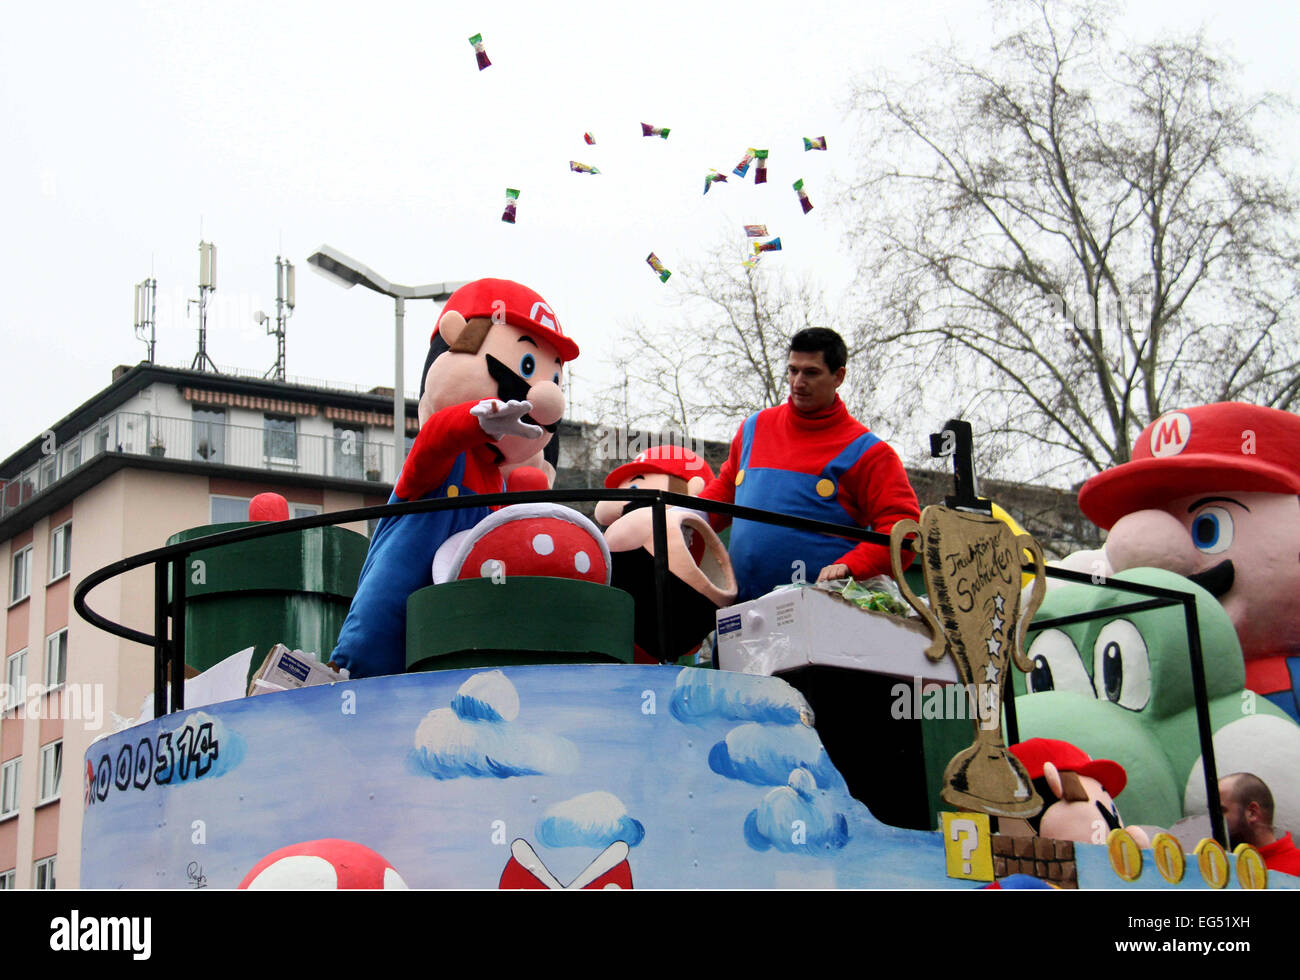 Mainz, Germany. 16th Feb, 2015. An actor in the costume of Super Mario  throws candies during the traditional Rose Monday carnival parade in the  western German city of Mainz, Feb. 16, 2015.